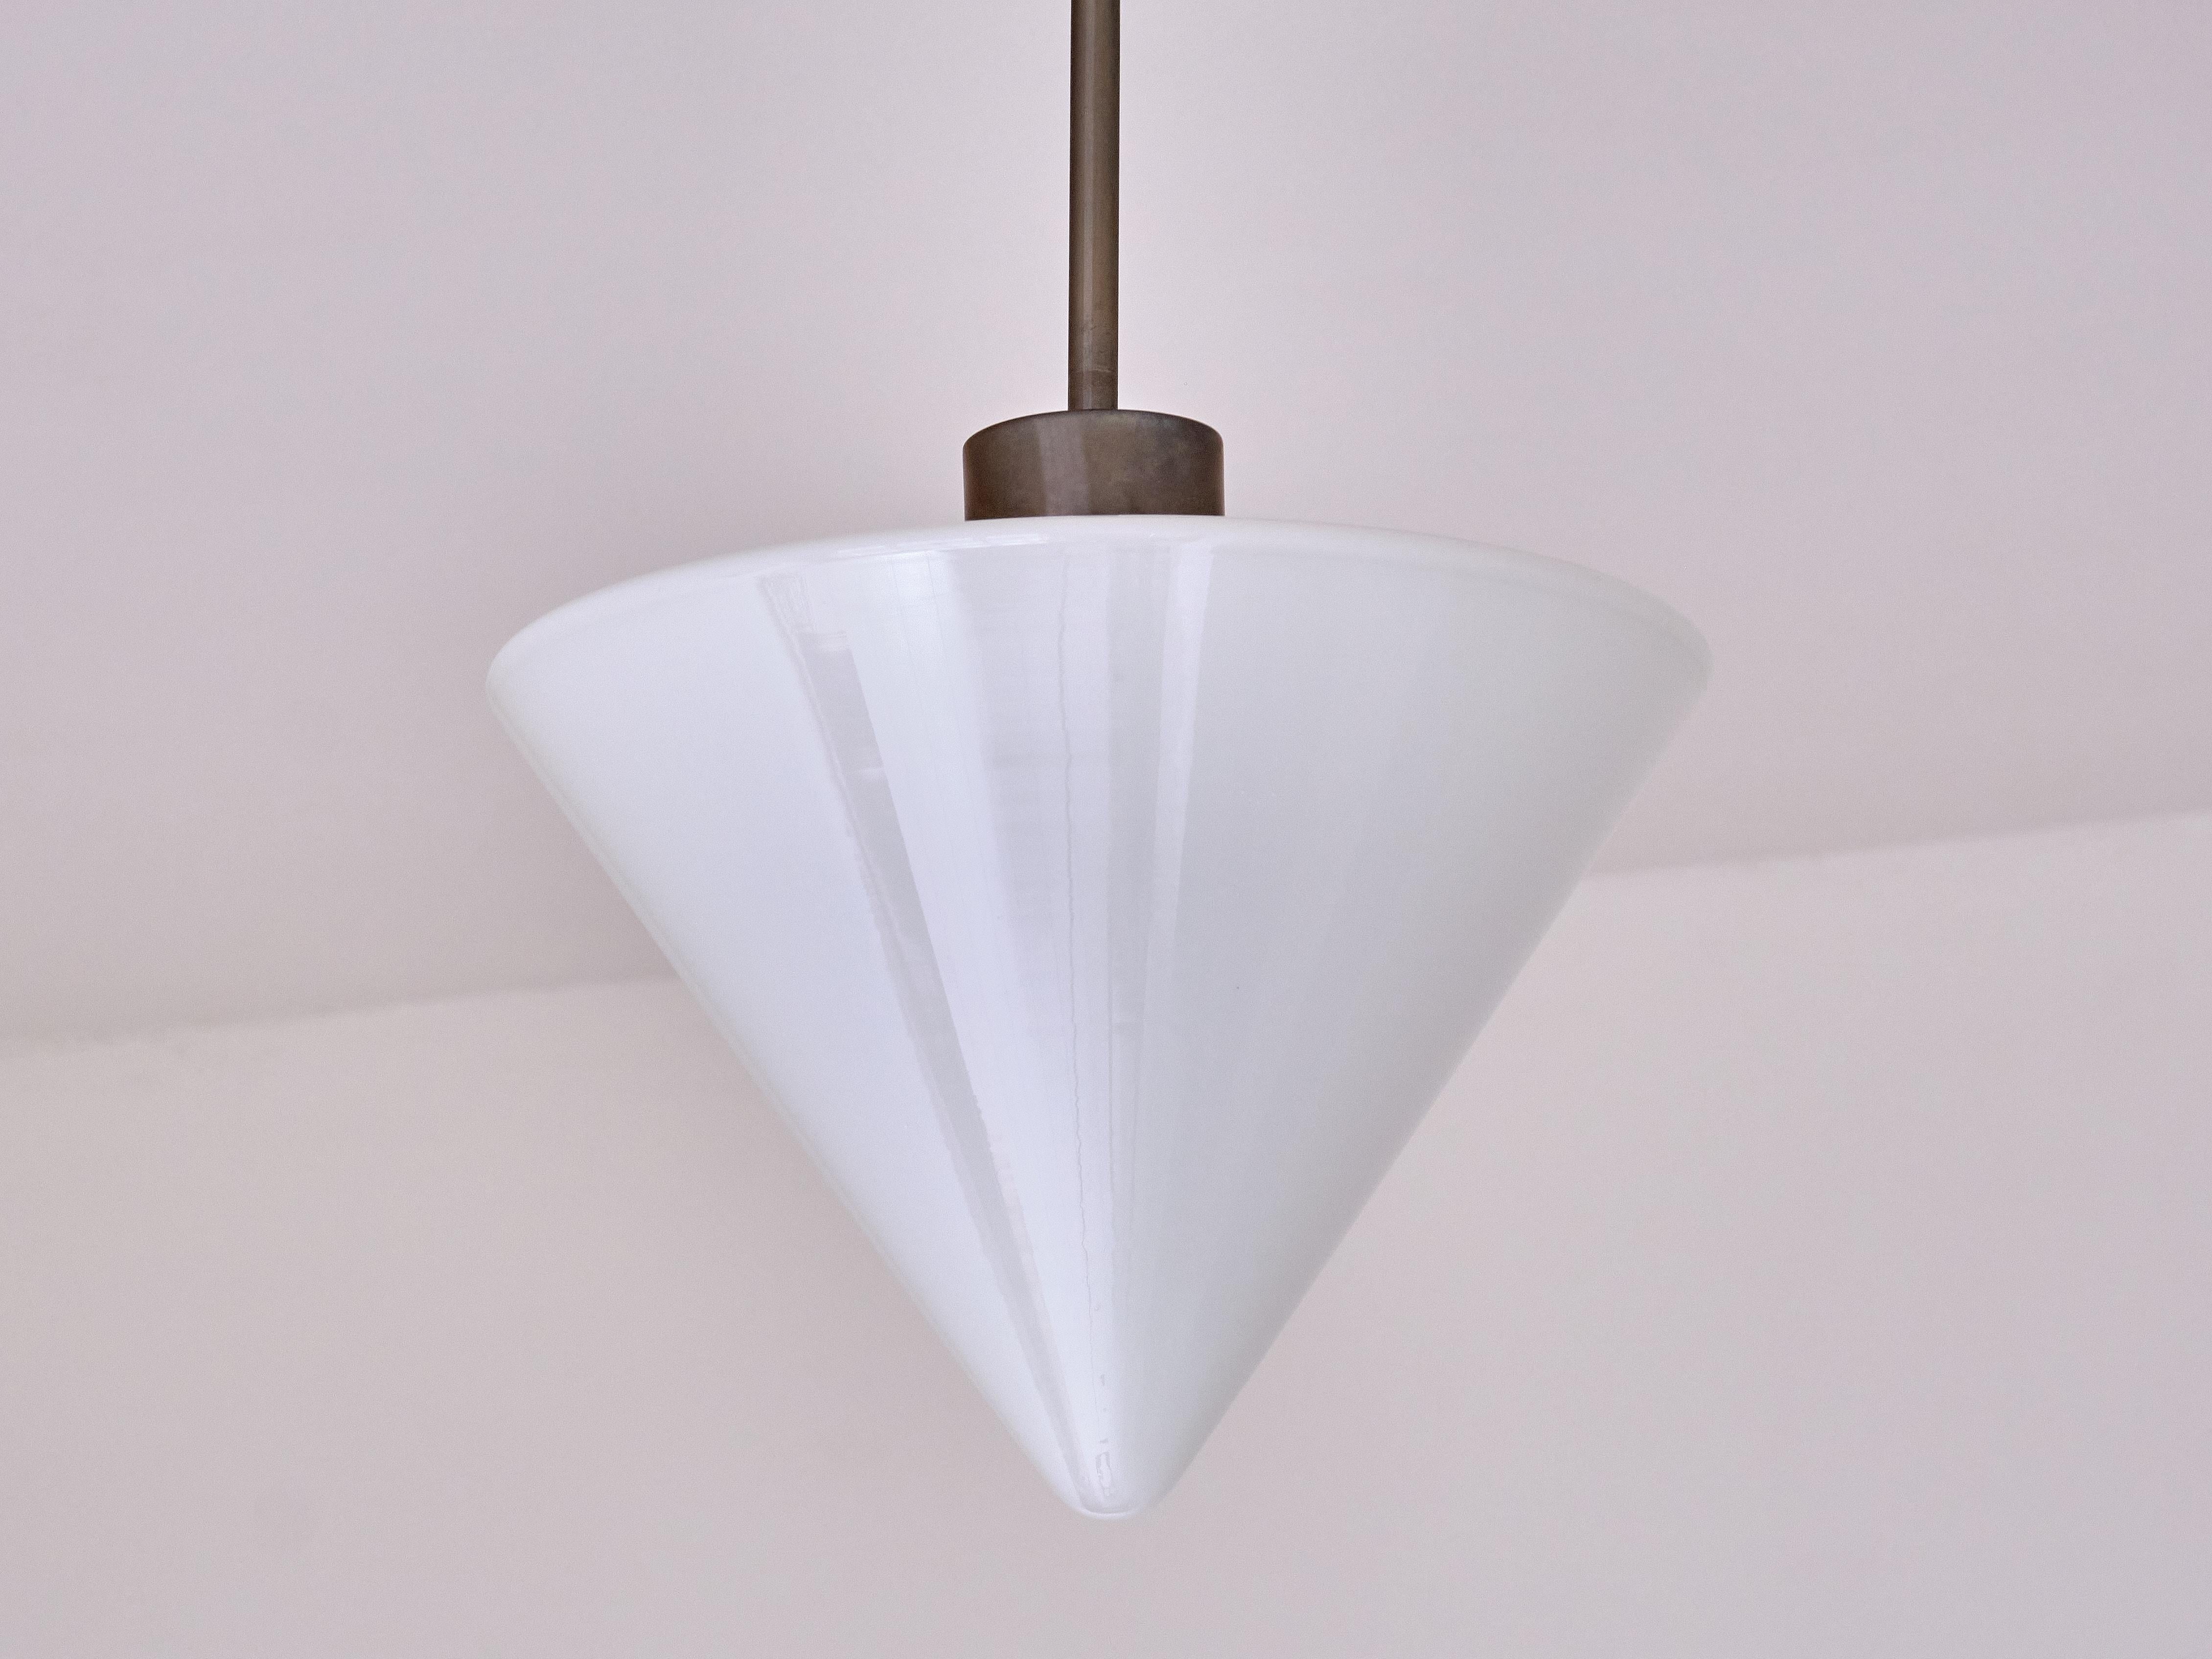 Gispen Cone Shaped Pendant Light in Opal Glass and Nickel, Netherlands, 1930s In Good Condition For Sale In The Hague, NL